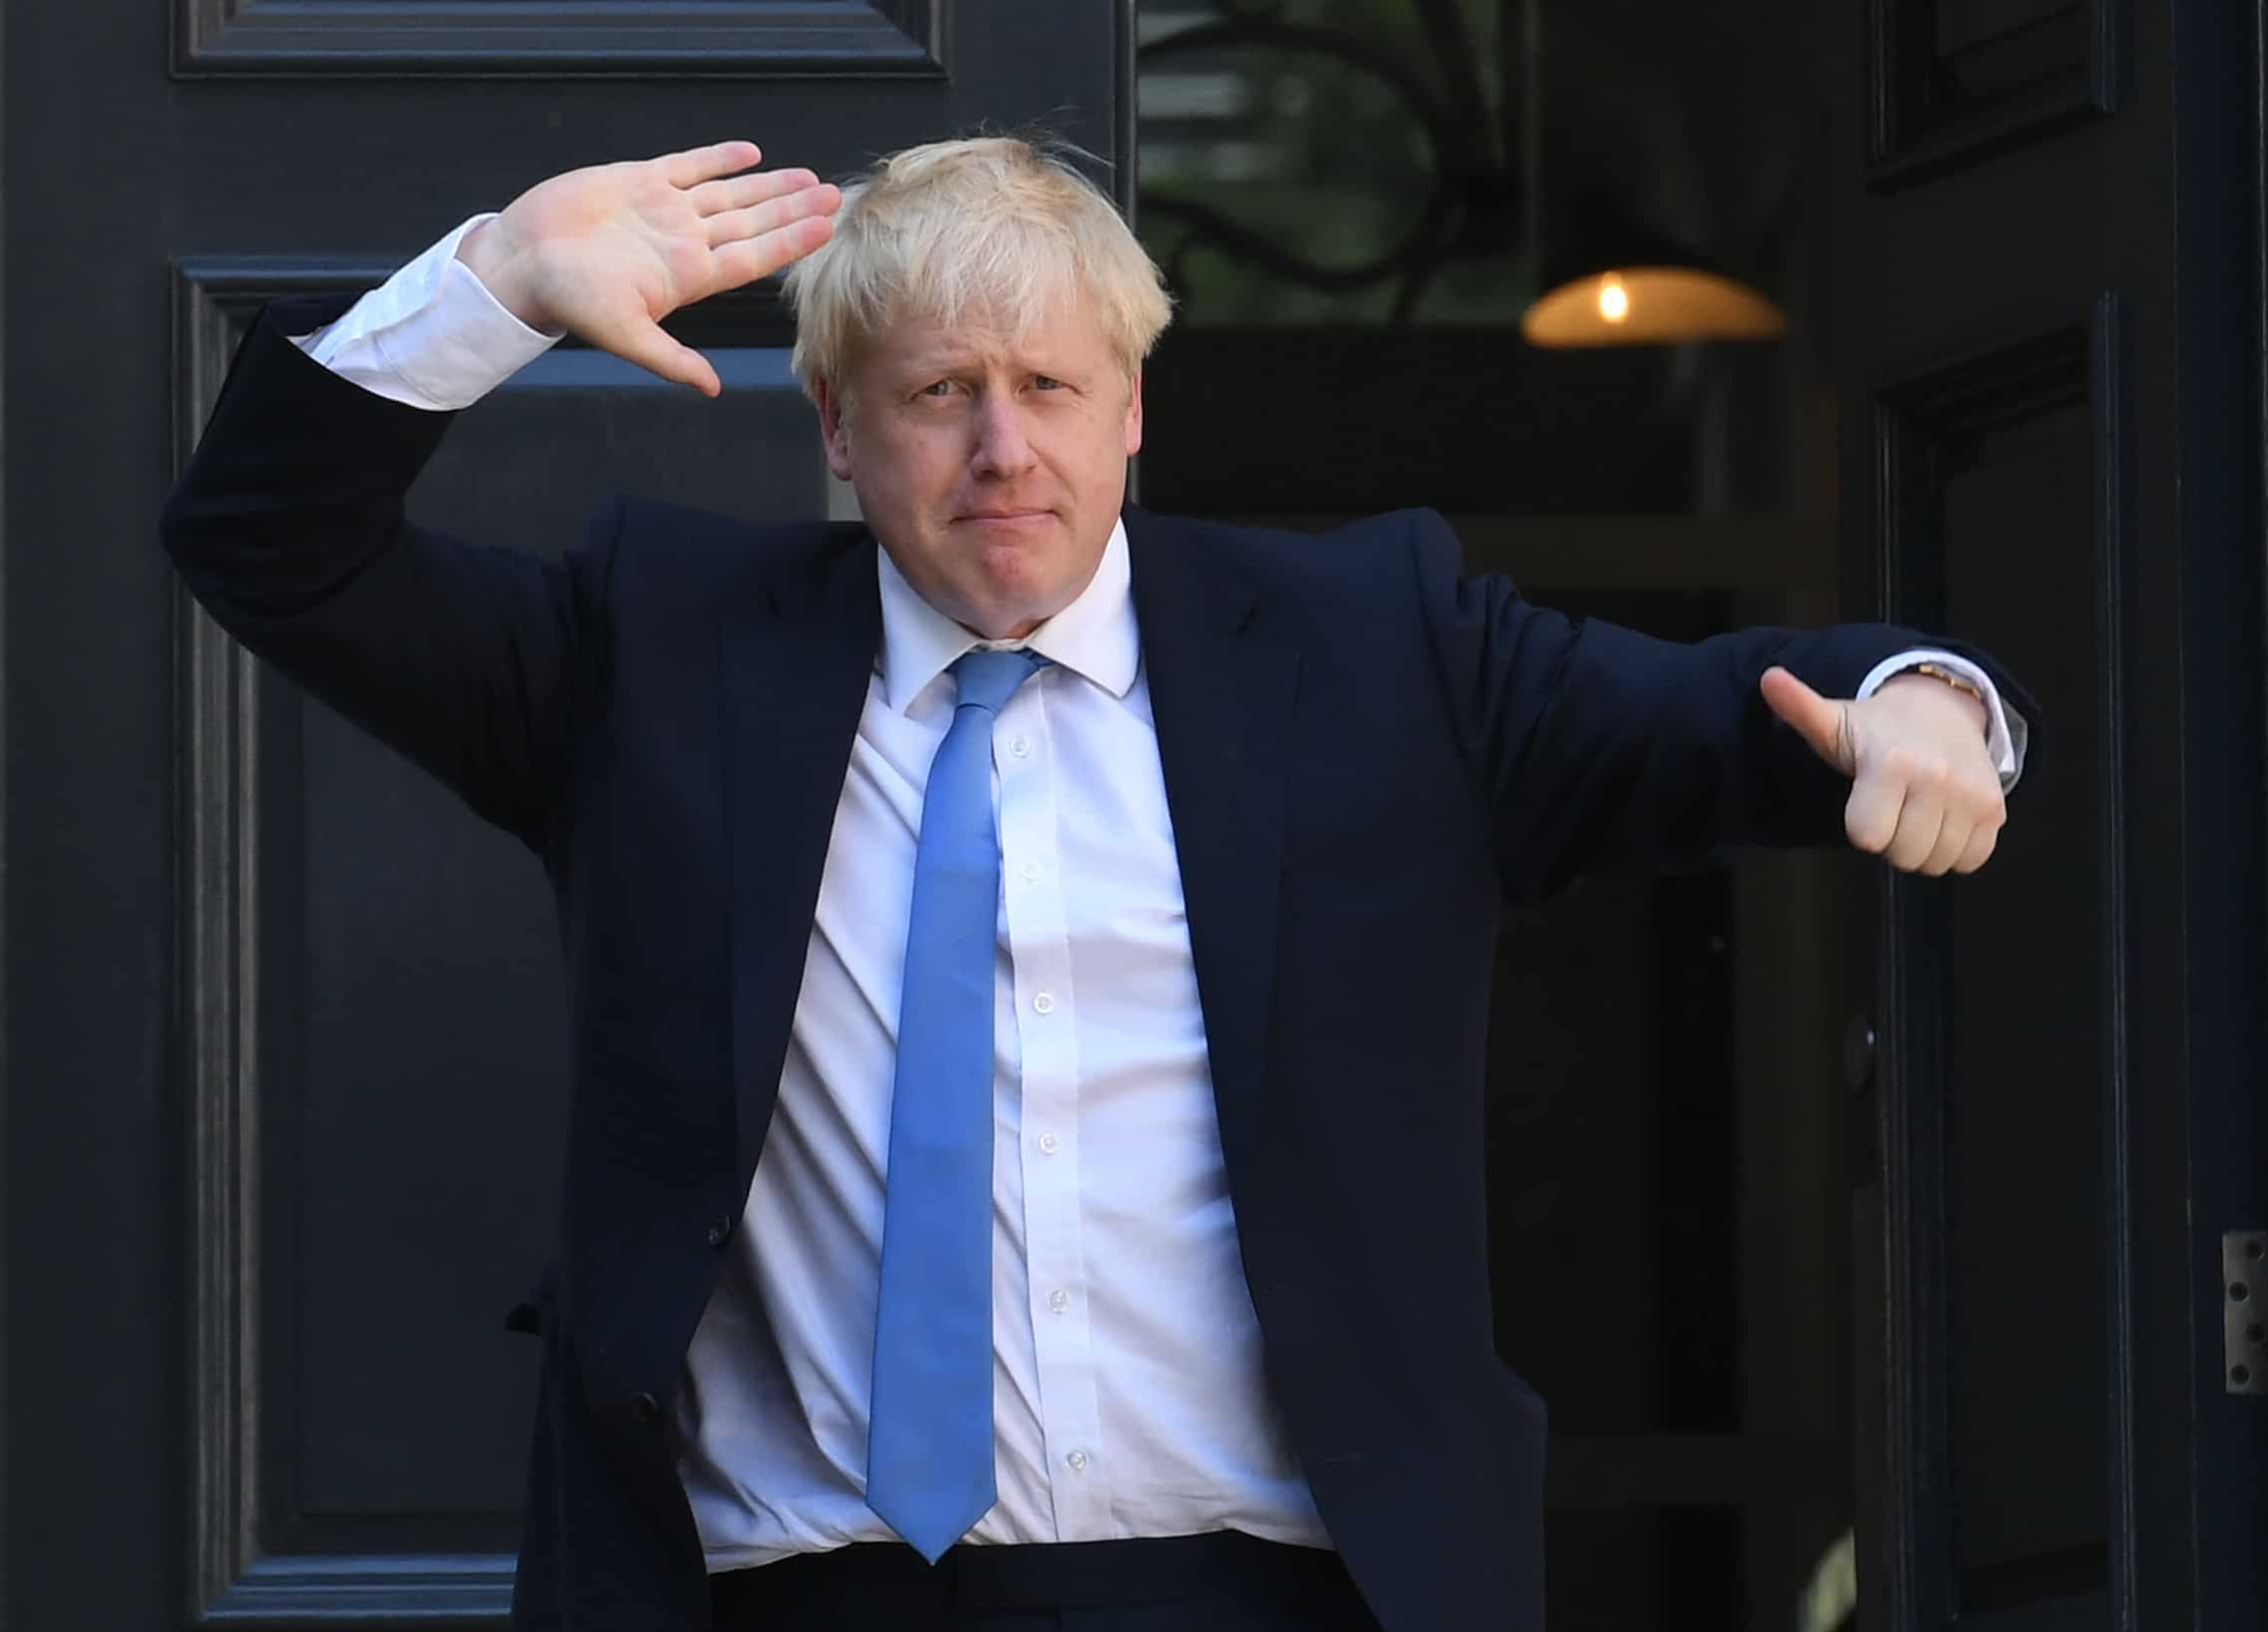 Johnson ‘wants to beat Thatcher’s 11 years in office’